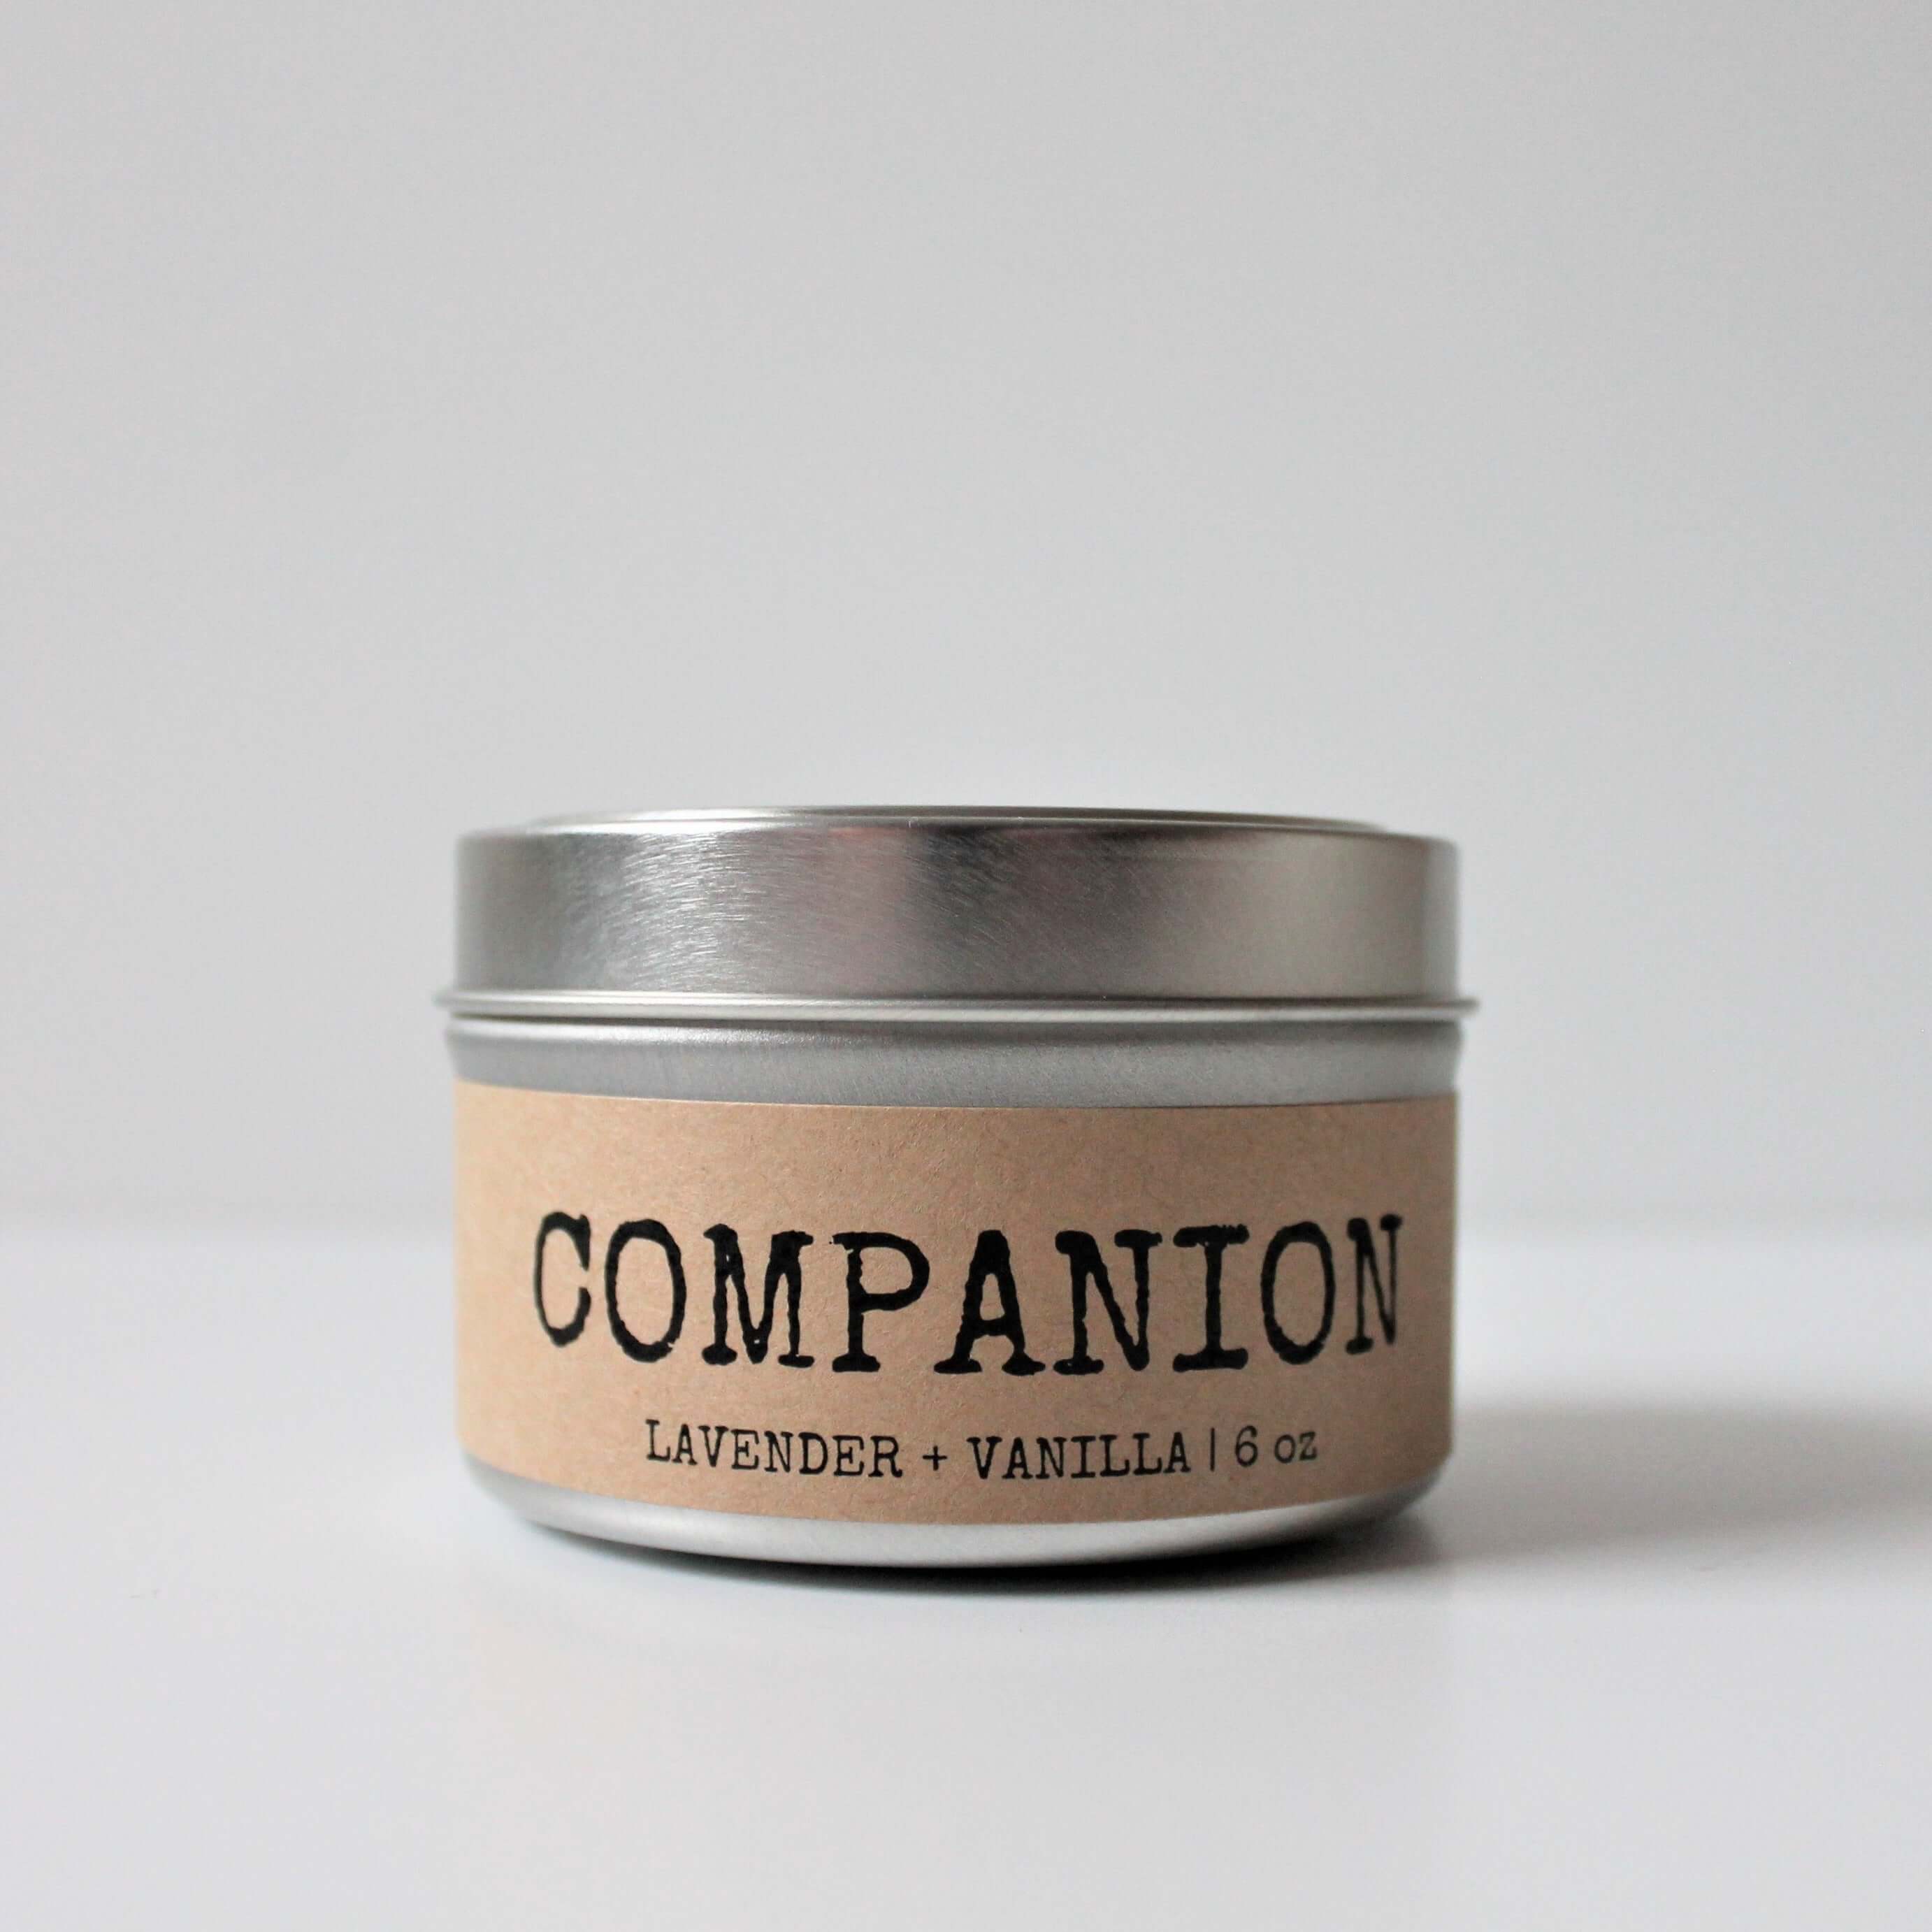 refillable soy candle, companies that donate to non-profits, companion soy candle, lavender soy candle, vanilla soy candle, companion 6 oz candle, long lasting candles, candles with a strong throw, wedding favor ideas, wedding favor candles, gift ideas, pet candles, dog candles, aromatherapy for animals, aromatherapy for pets, aromatherapy for cats, aromatherapy for dogs